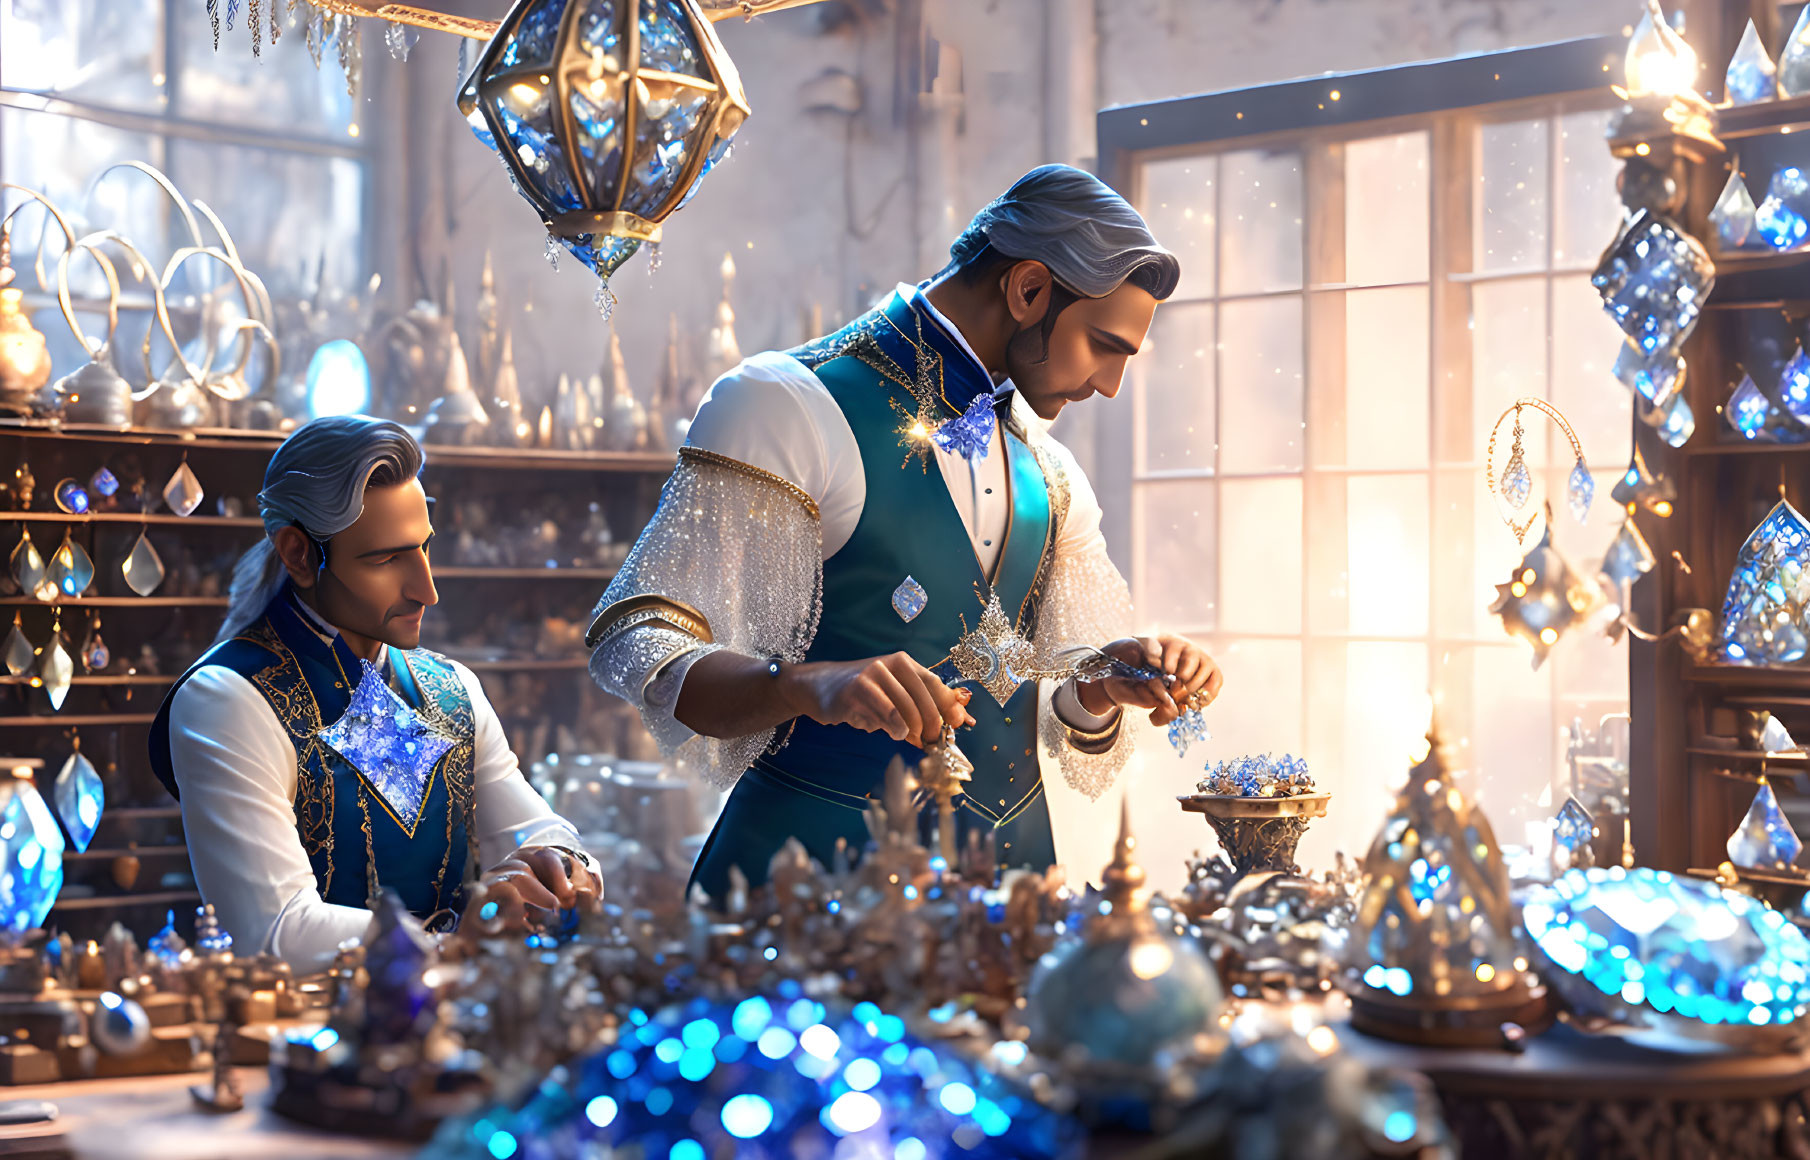 Men in ornate clothing examine intricate jewelry at lavish workshop